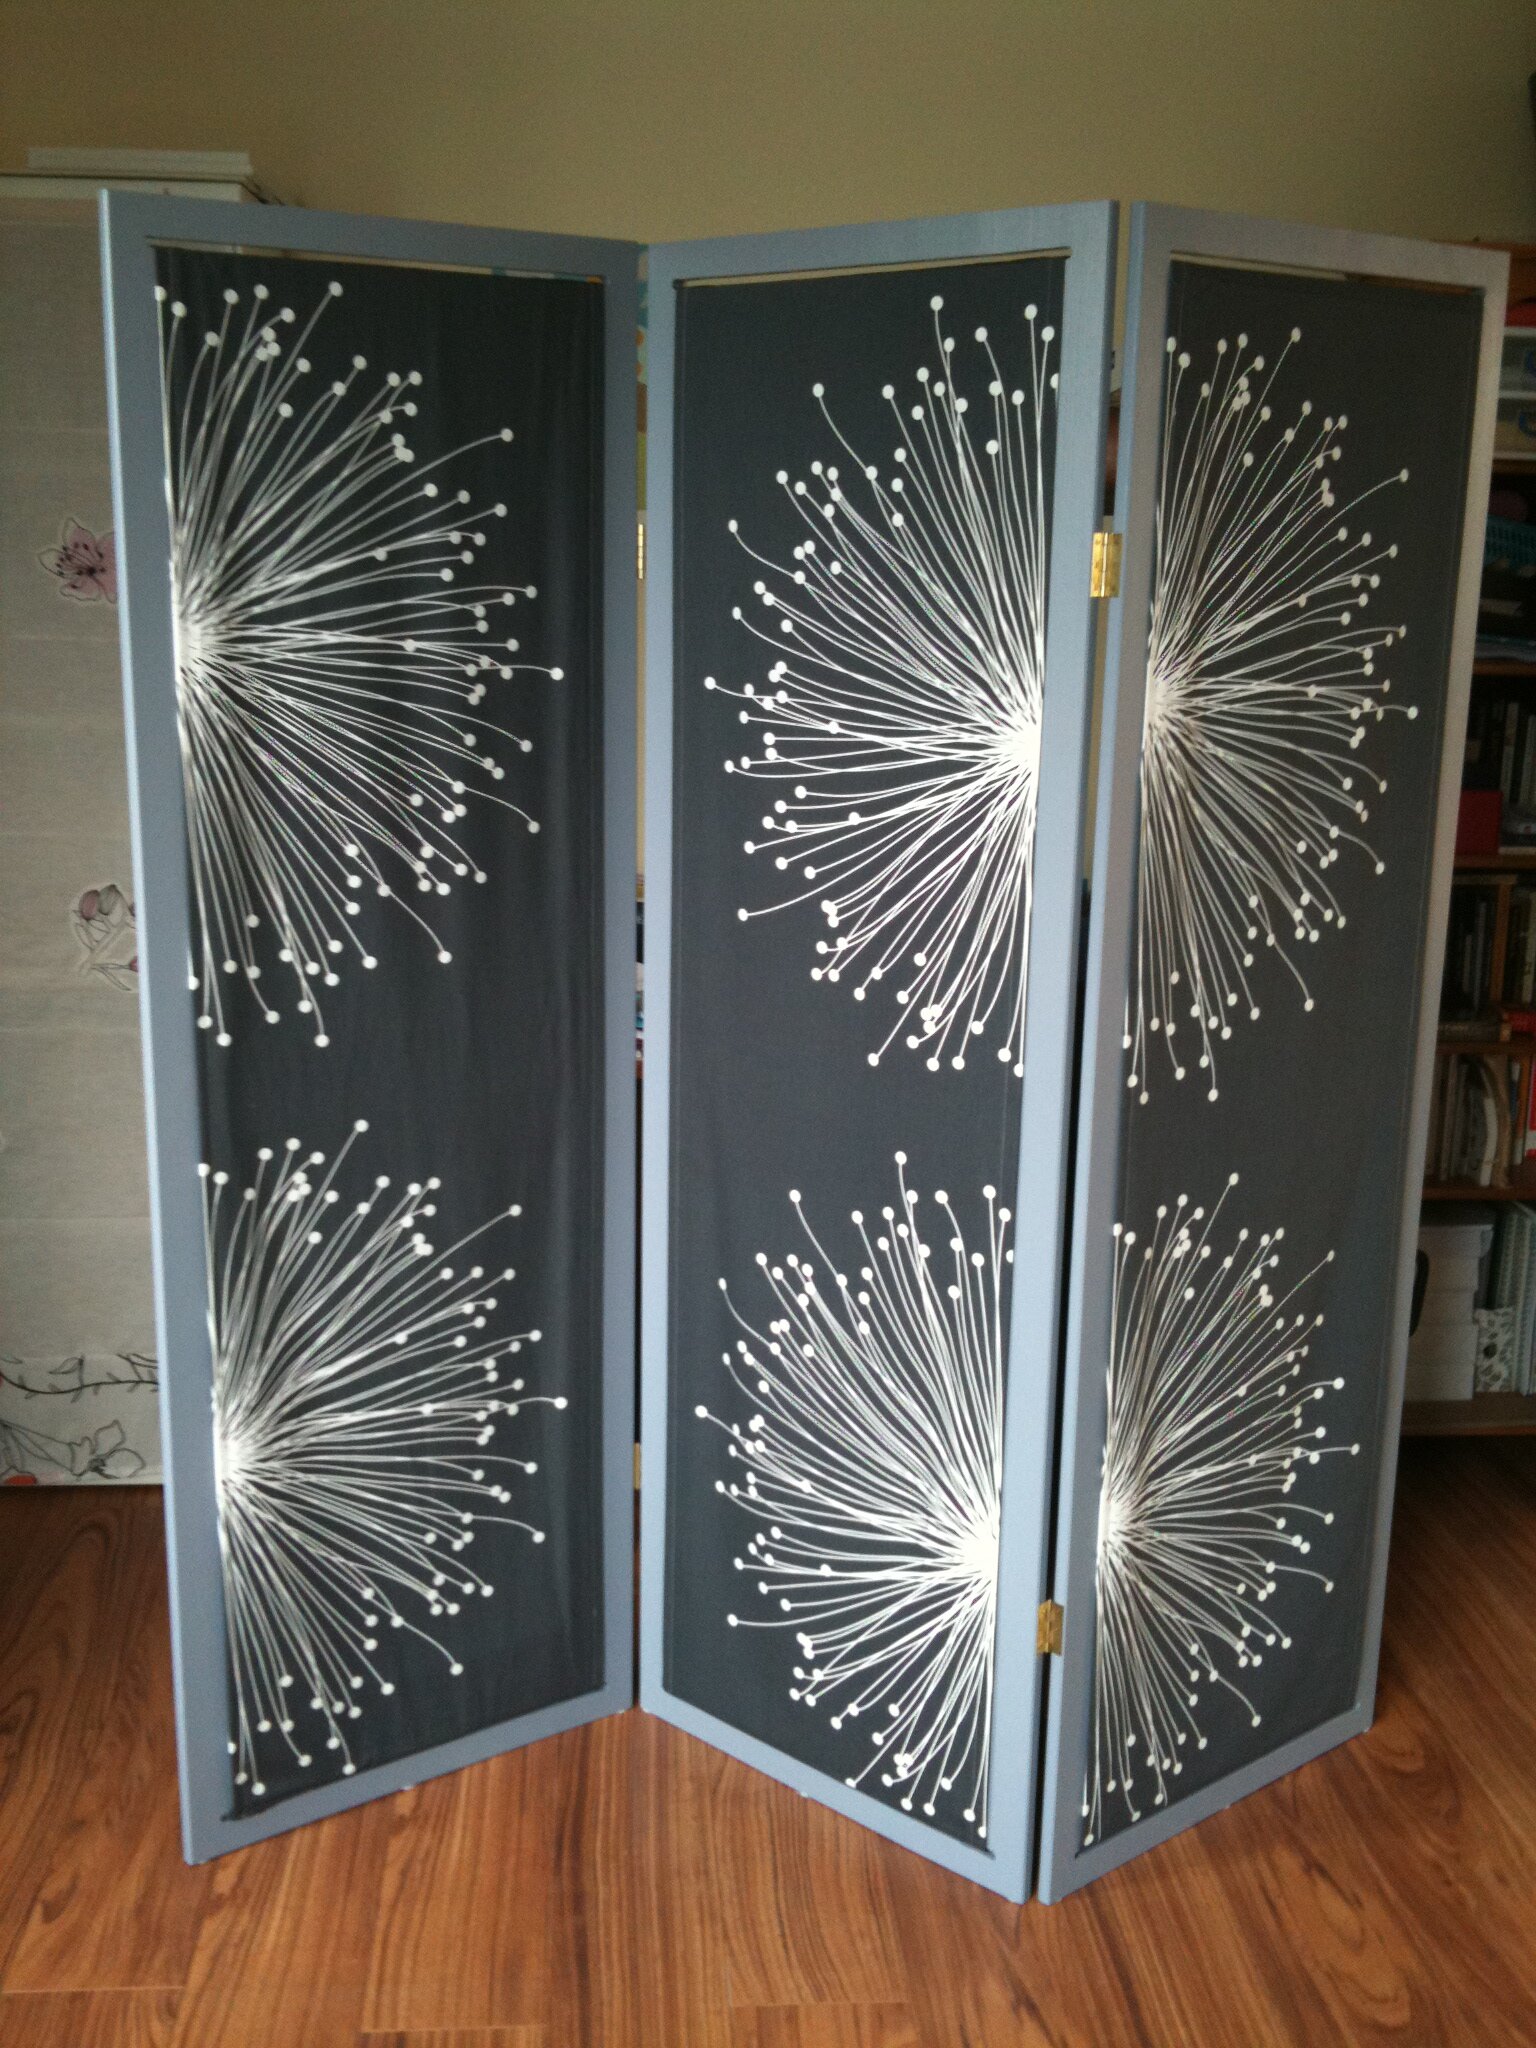 Room Dividers Diy | Room Divider Ideas Ikea | Room Divider Ideas with Curtains